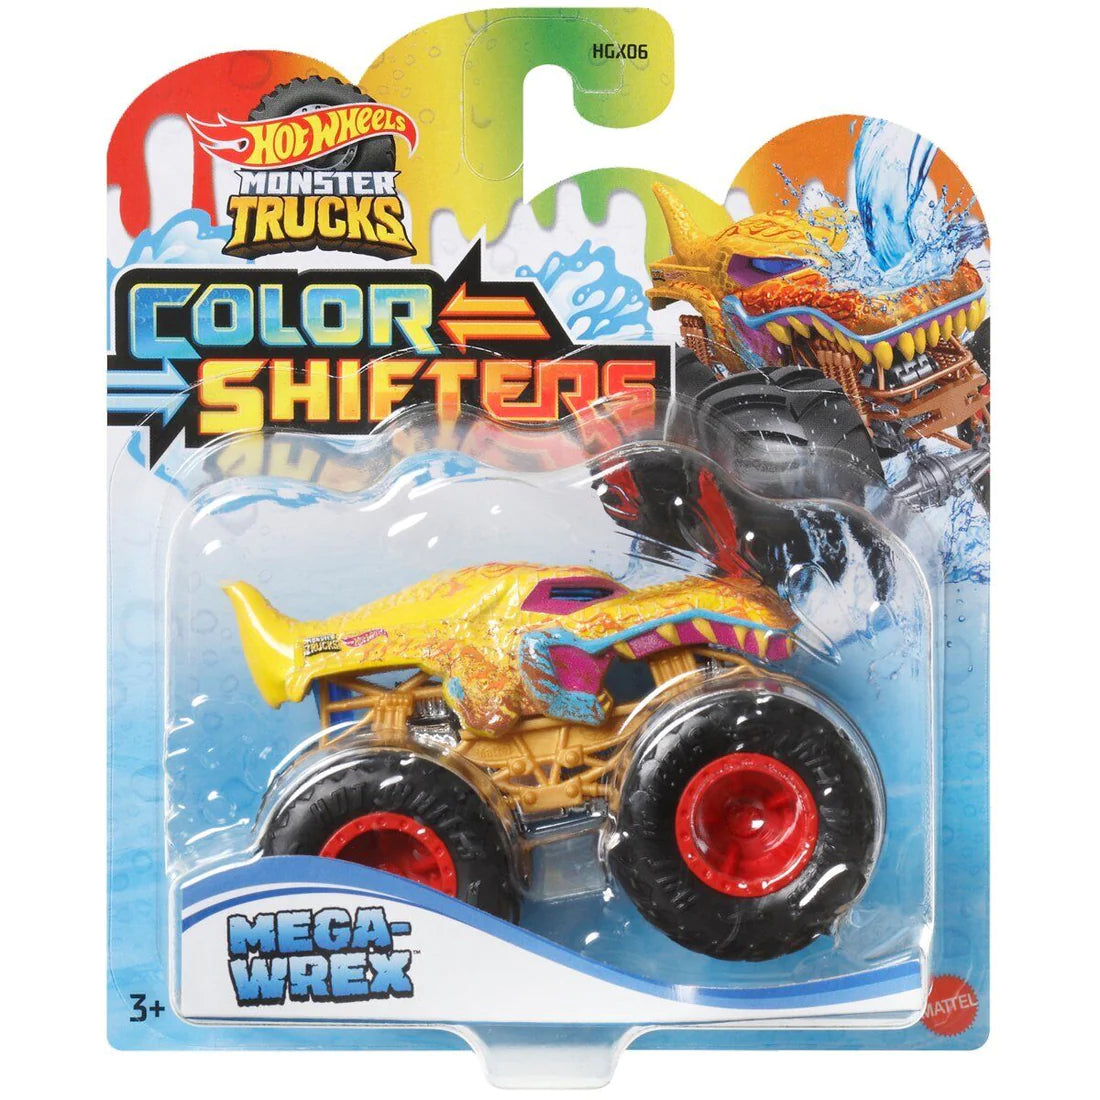 Hot Wheels Monster Trucks Color/Colour Shifters 1:64 New Sealed select the best - MEGA-WREX